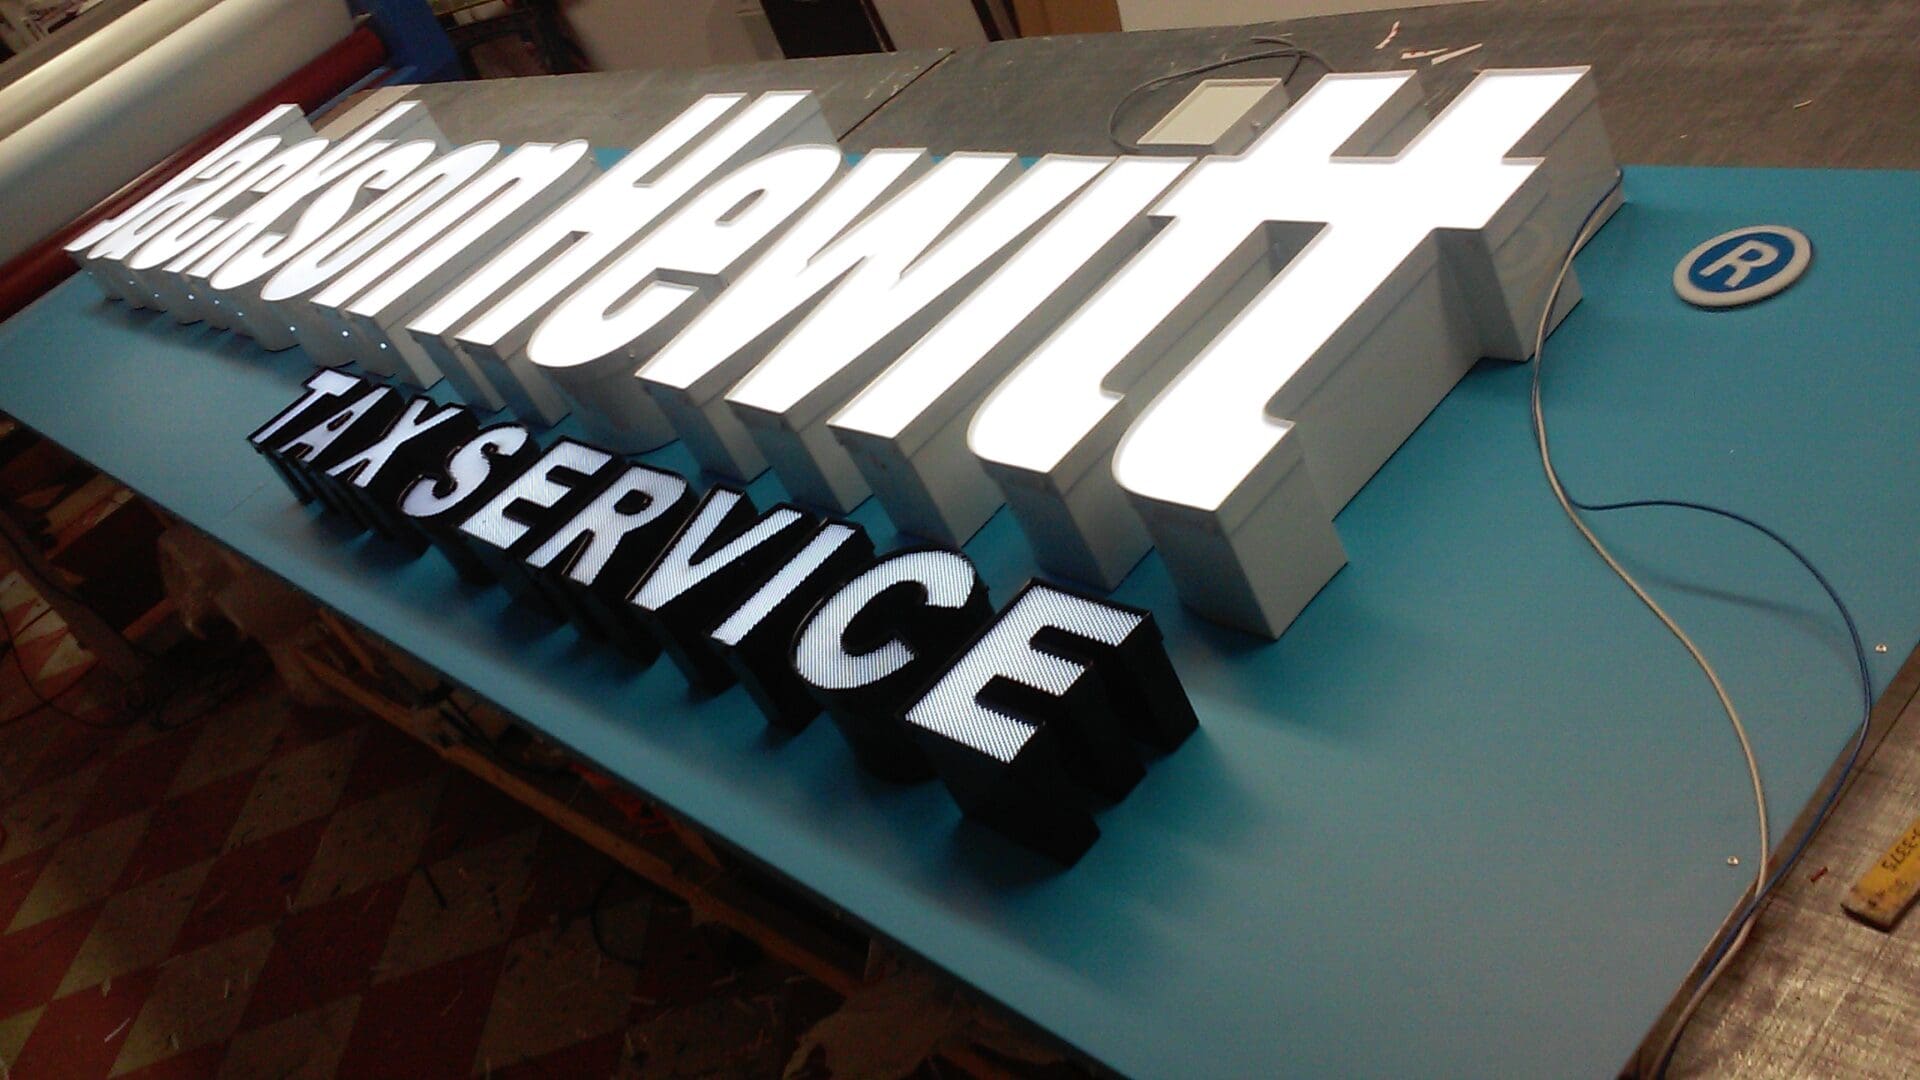 A close up of the sign for an electrical service.